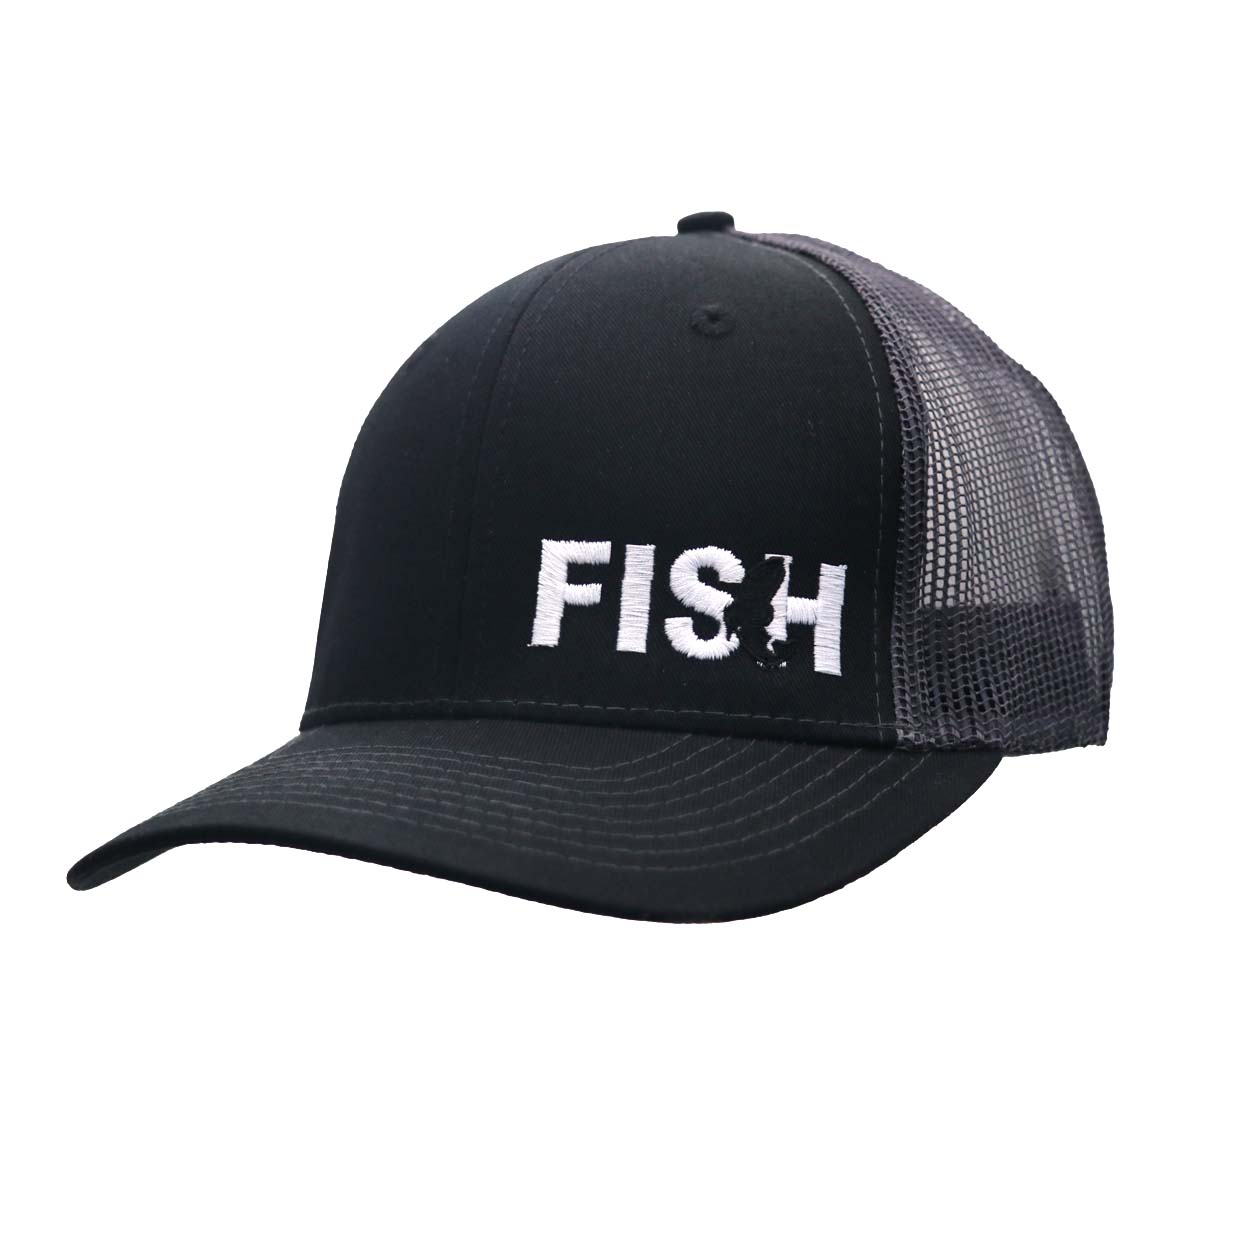 Fish Catch Logo Night Out Embroidered Snapback Trucker Hat Black/Dark Gray